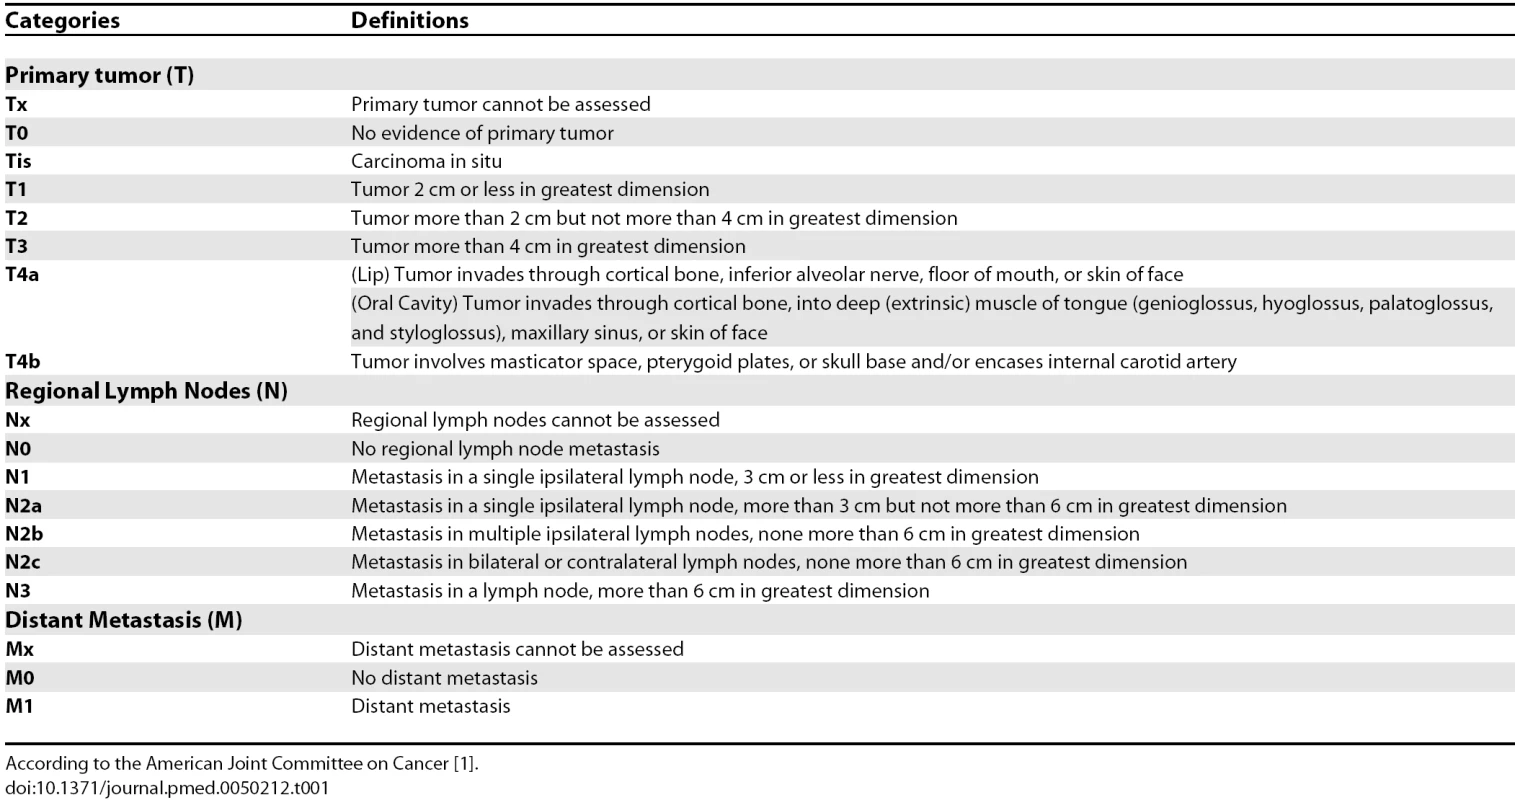 TNM Classification System for Oral Squamous Cell Carcinoma